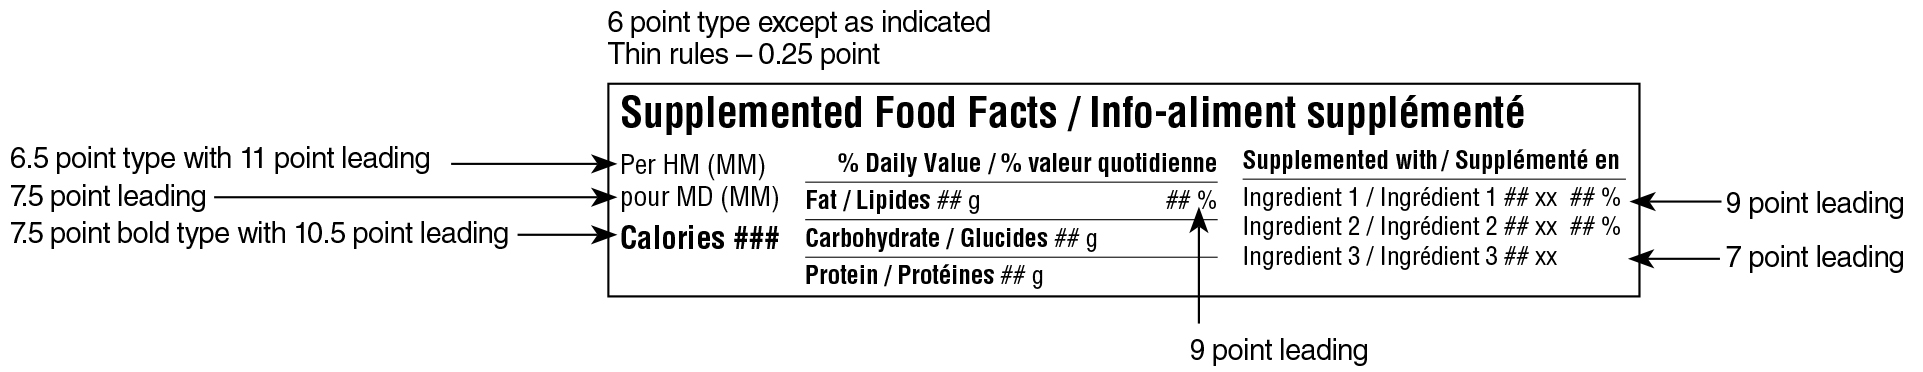 A bilingual Supplemented Food Facts table in simplified horizontal format surrounded by specifications. Text version below.